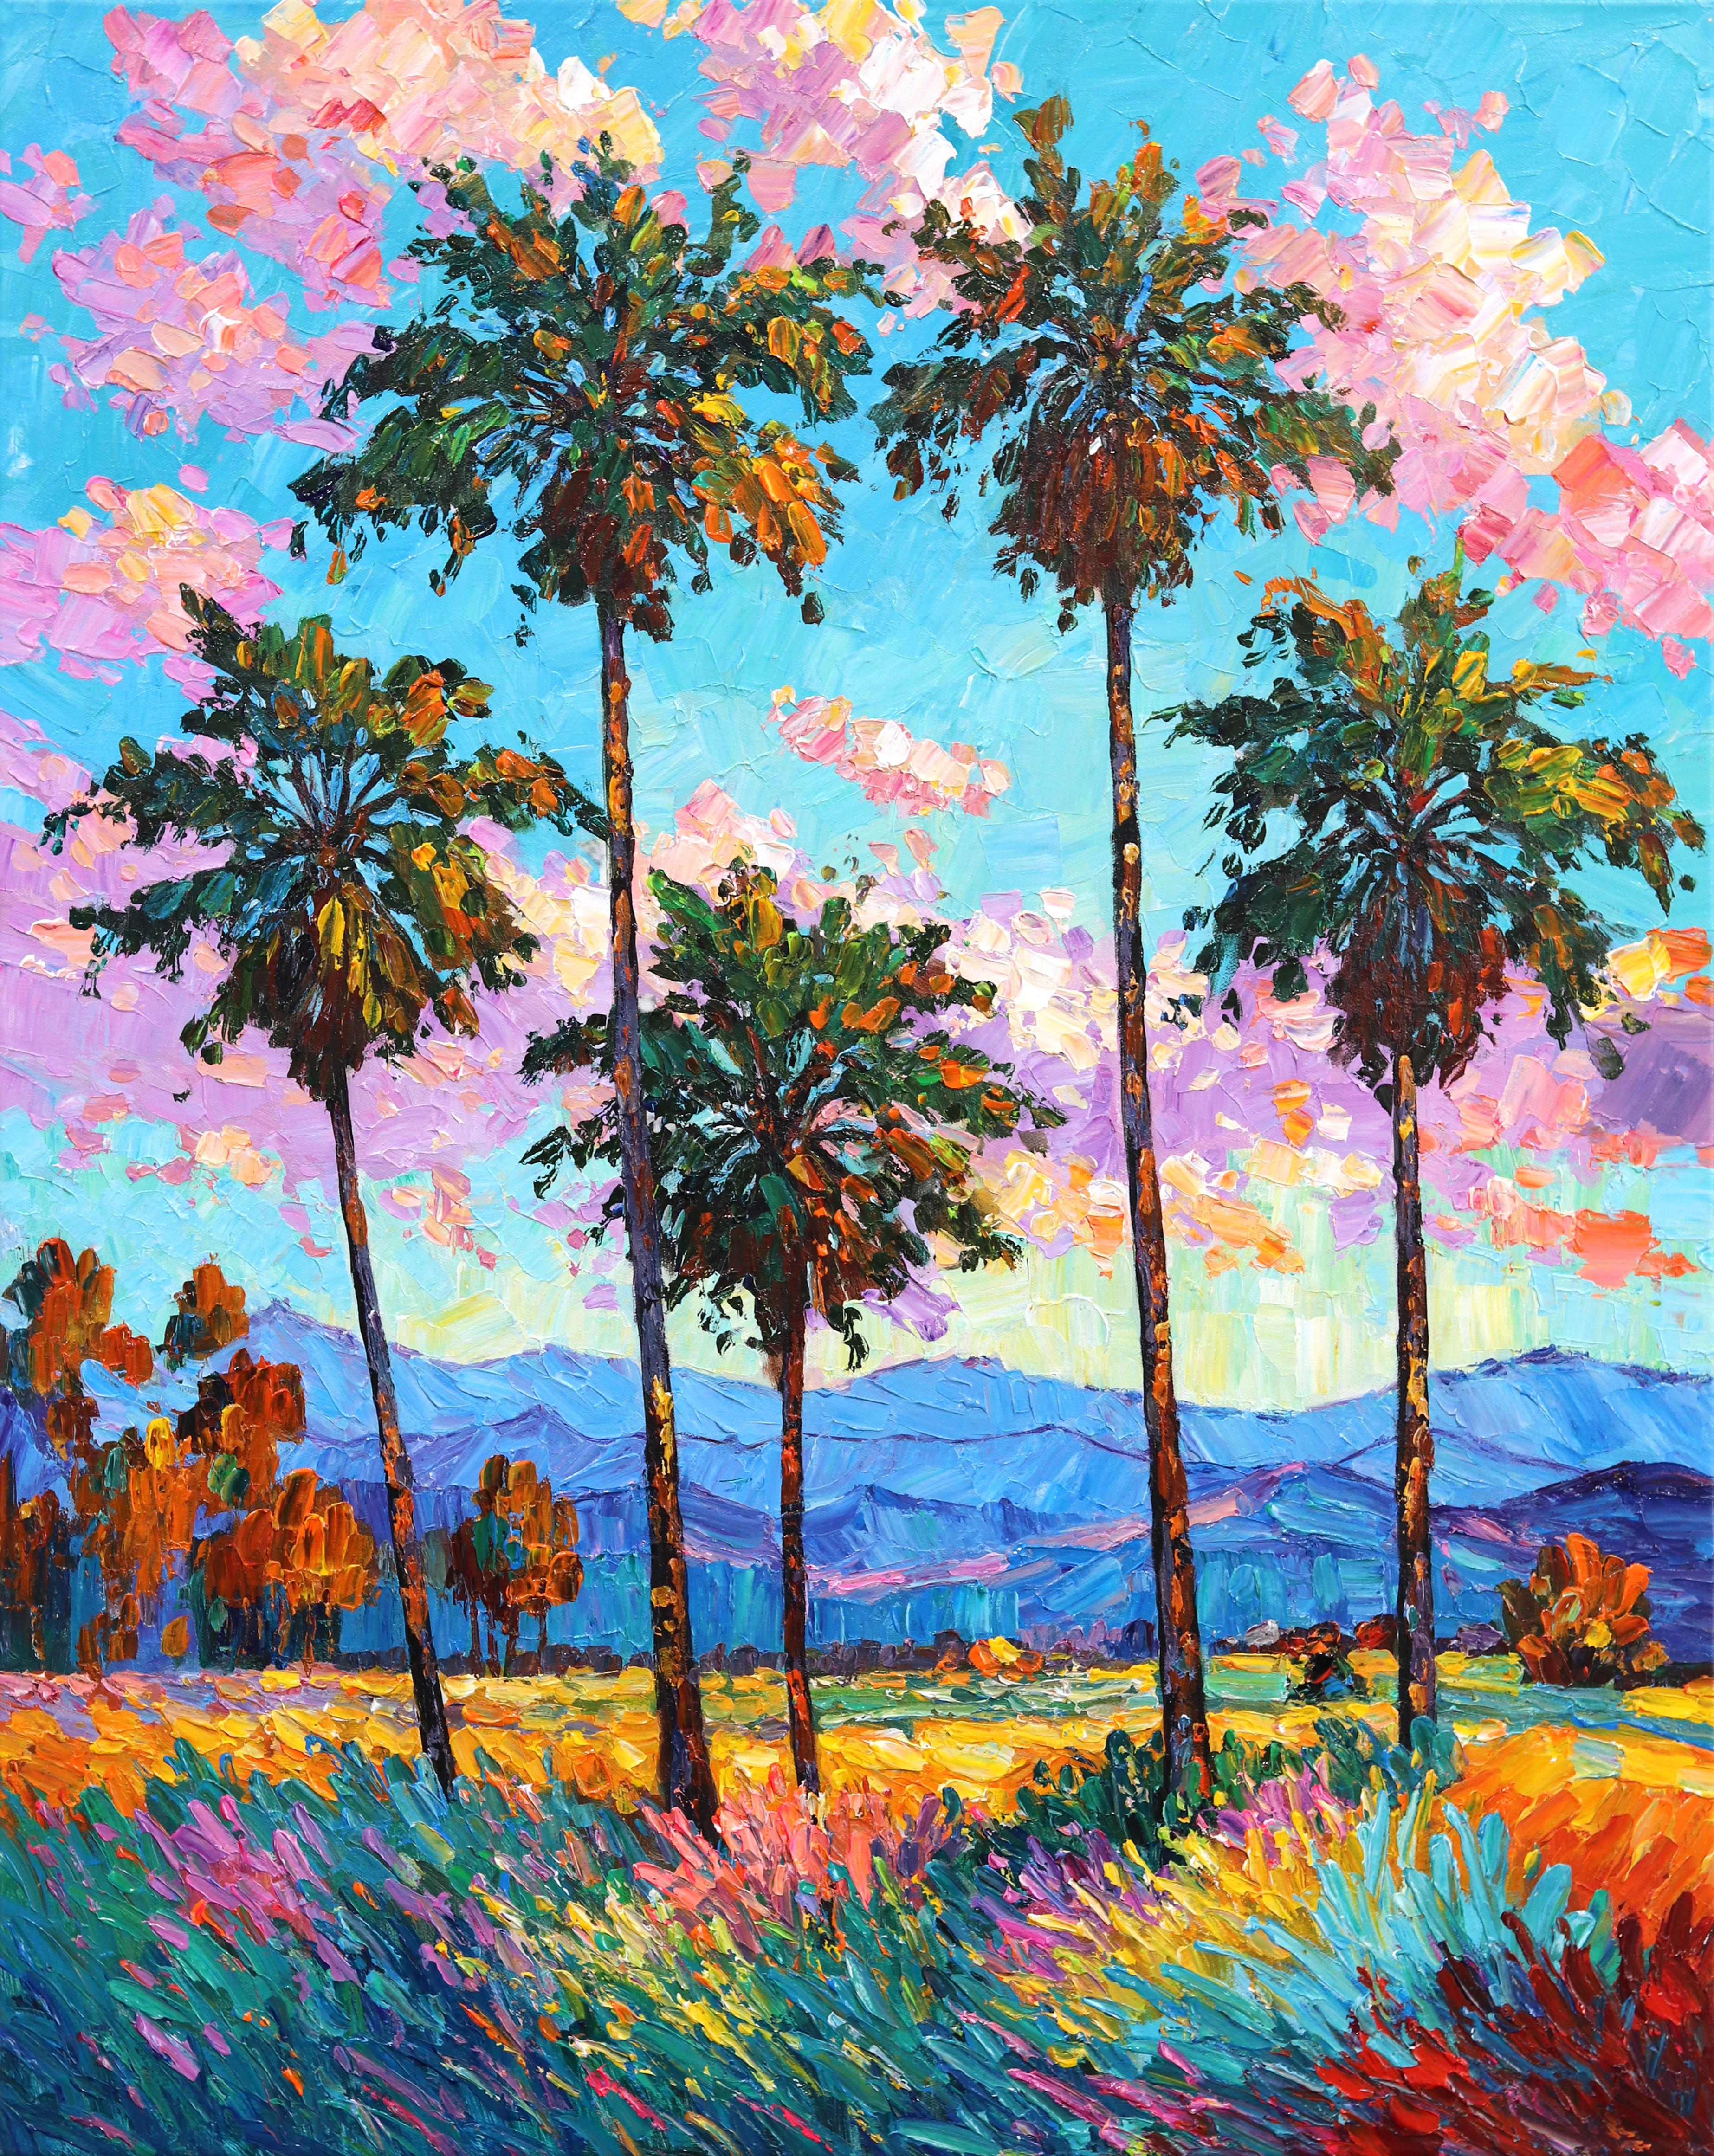 Palm Trees Rising - Vibrant Textural Landscape Oil Painting